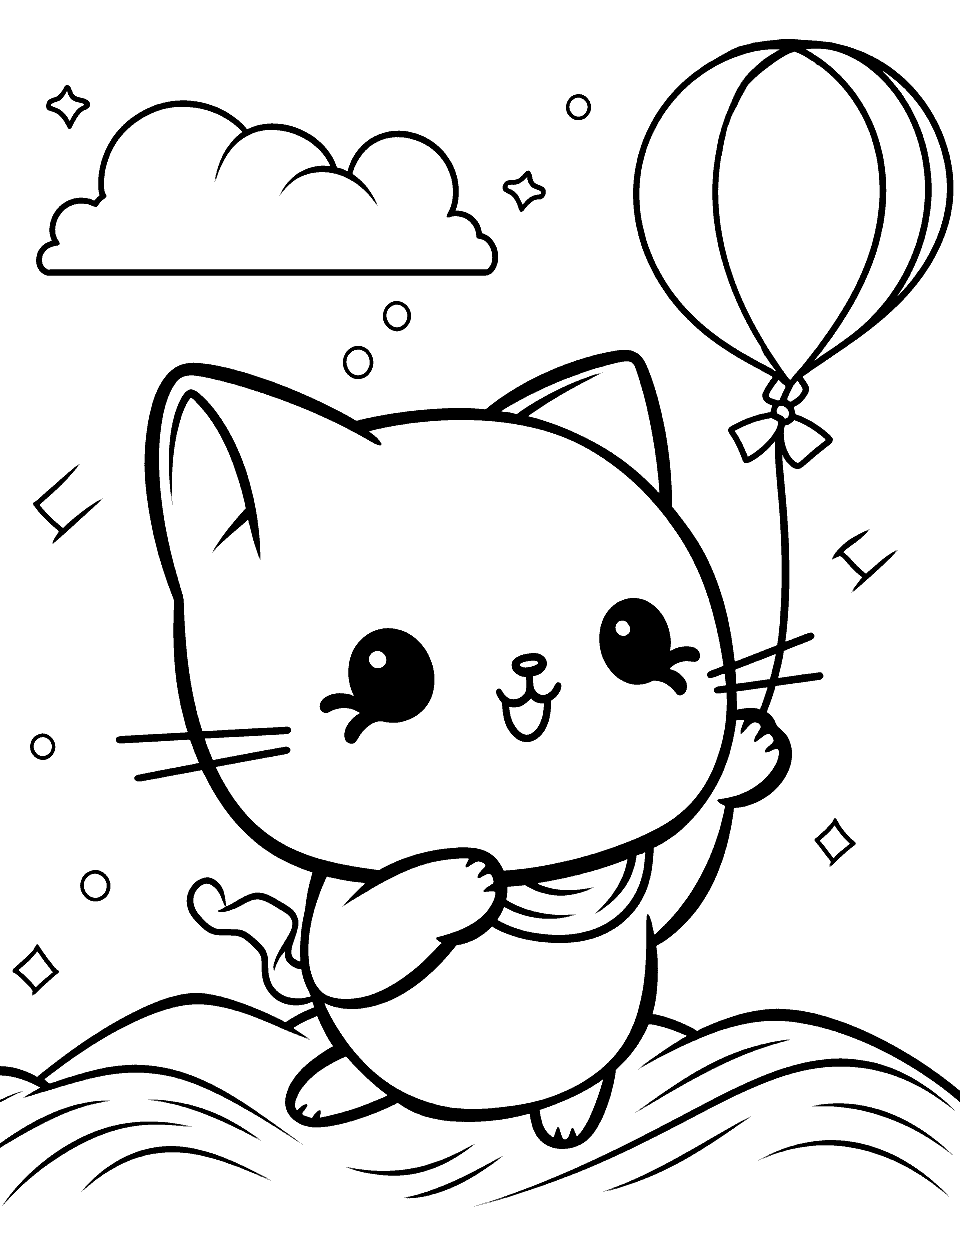 Breezy Day with Kawaii Kitty Coloring Page - A cheerful Kawaii kitty flying a colorful balloon on a breezy day.